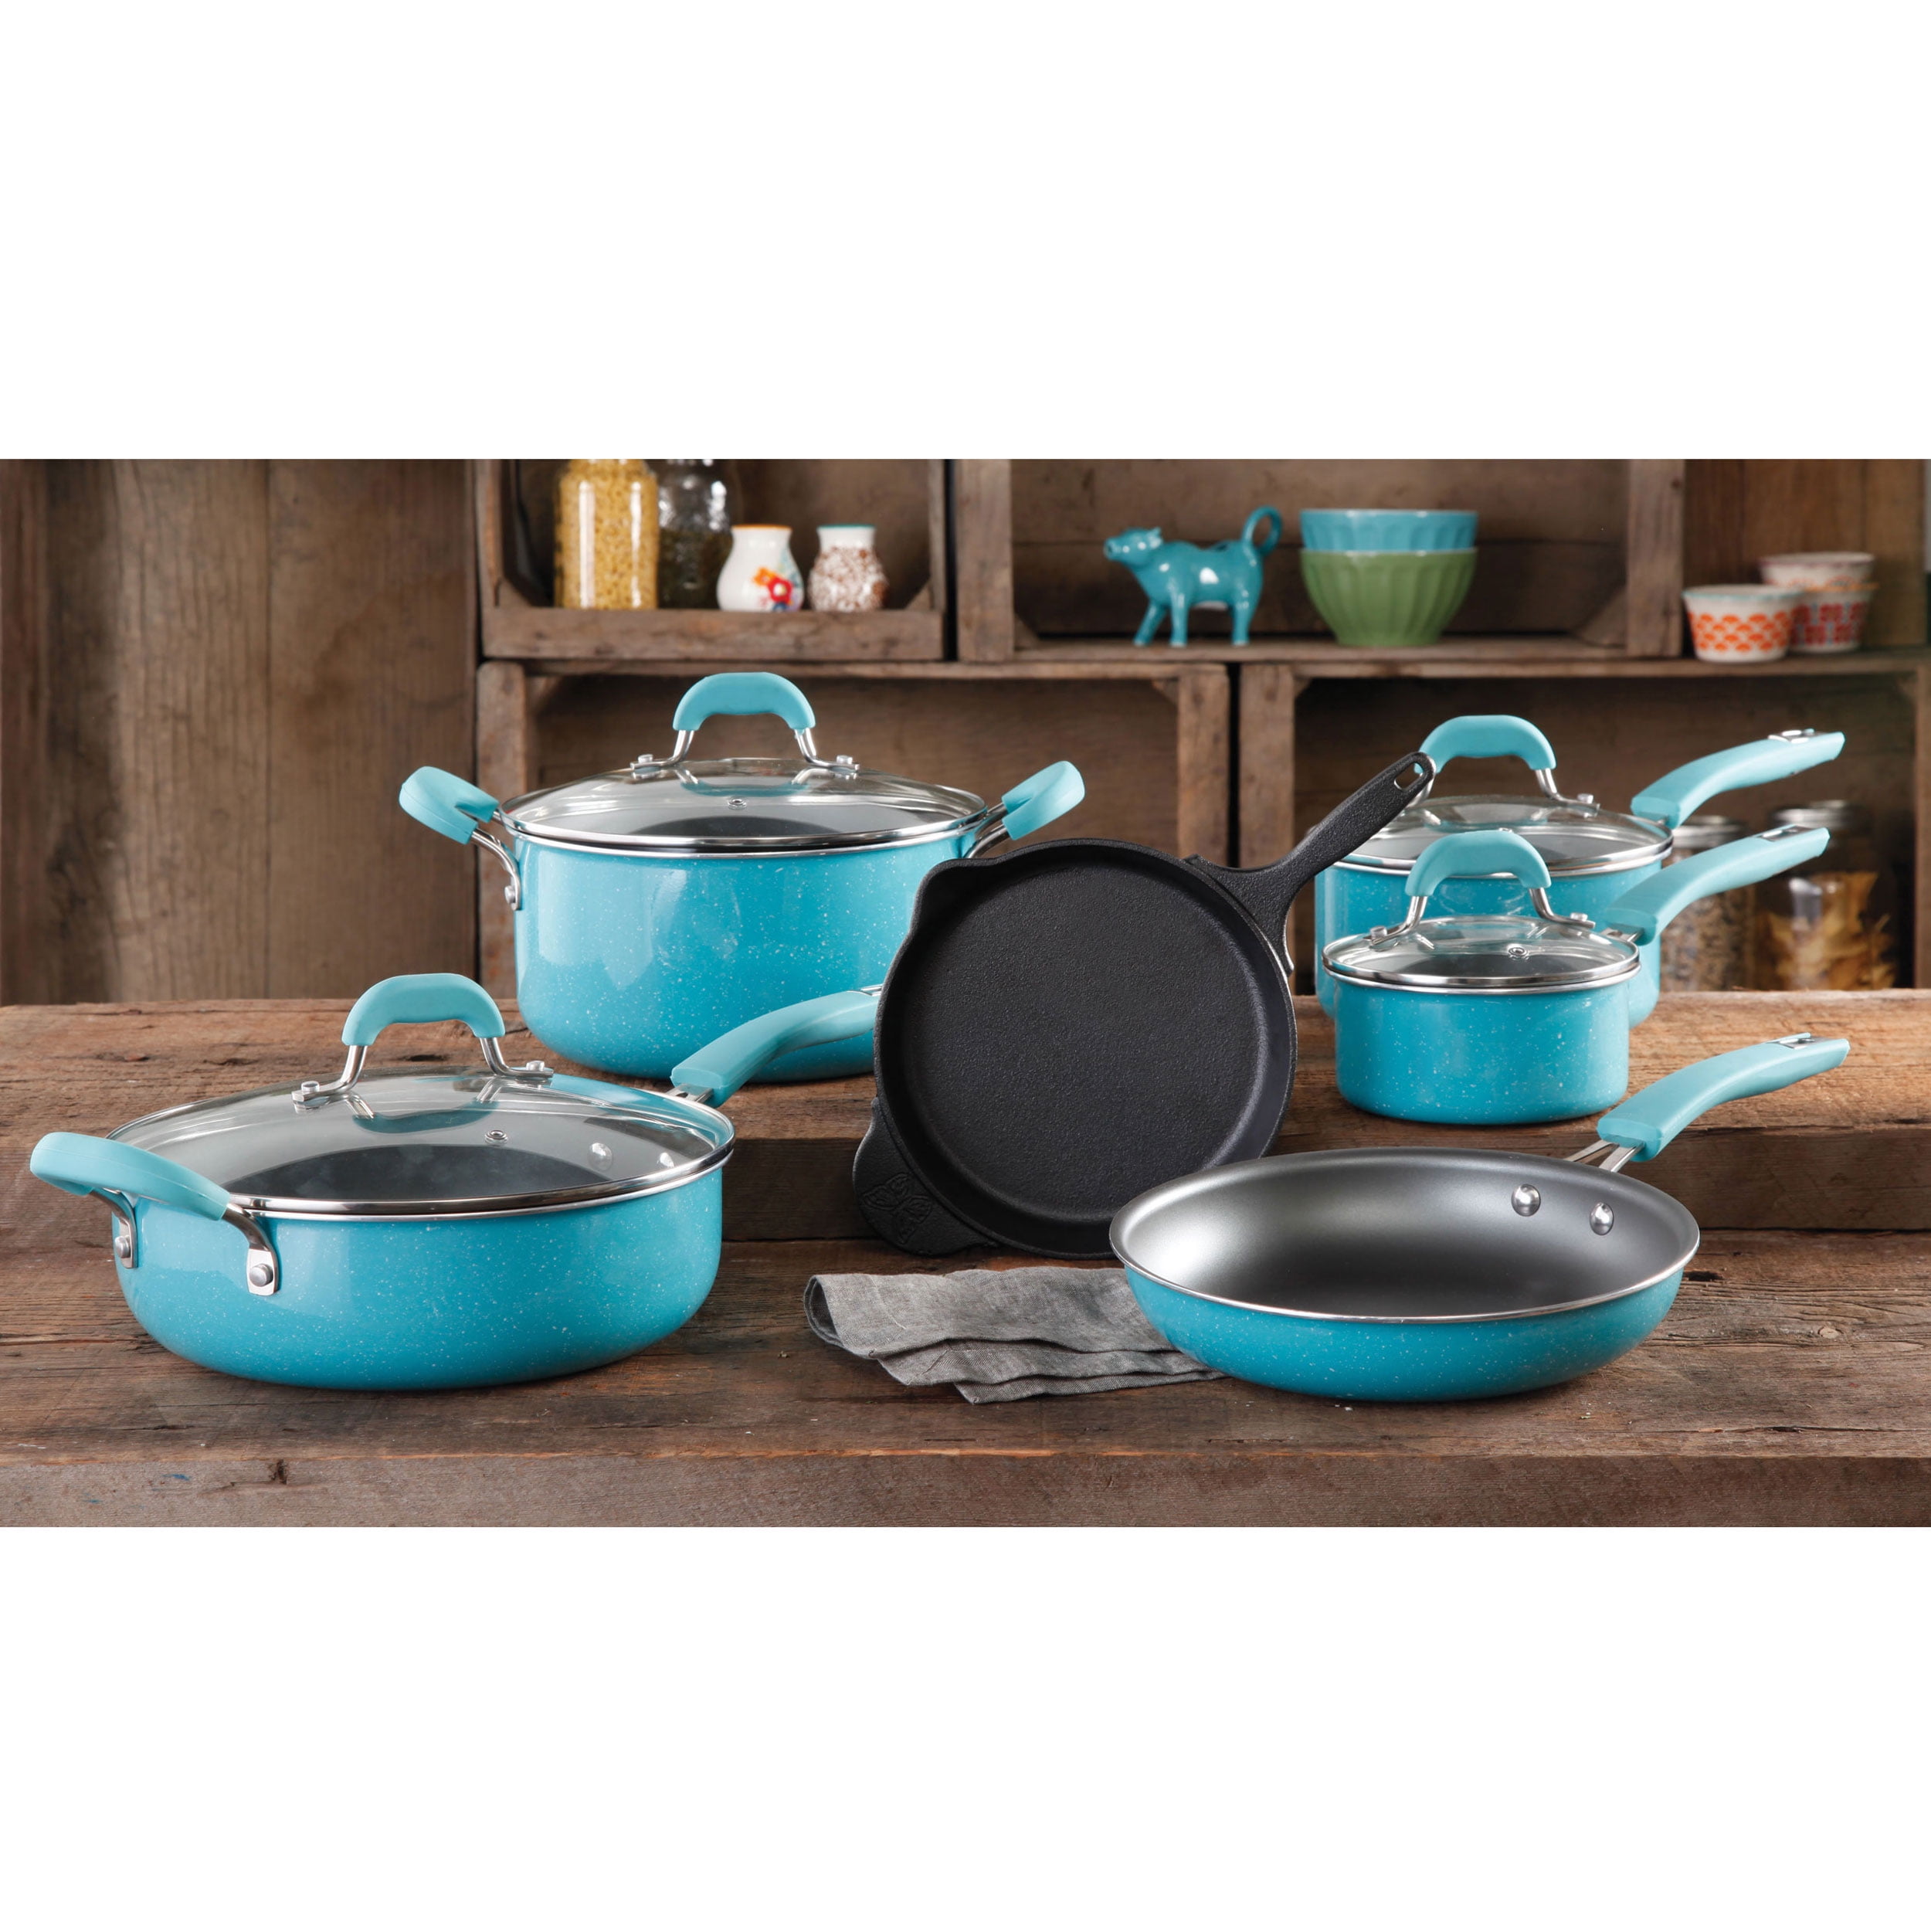 The Pioneer Woman Floral Pattern Ceramic Nonstick Cookware Set